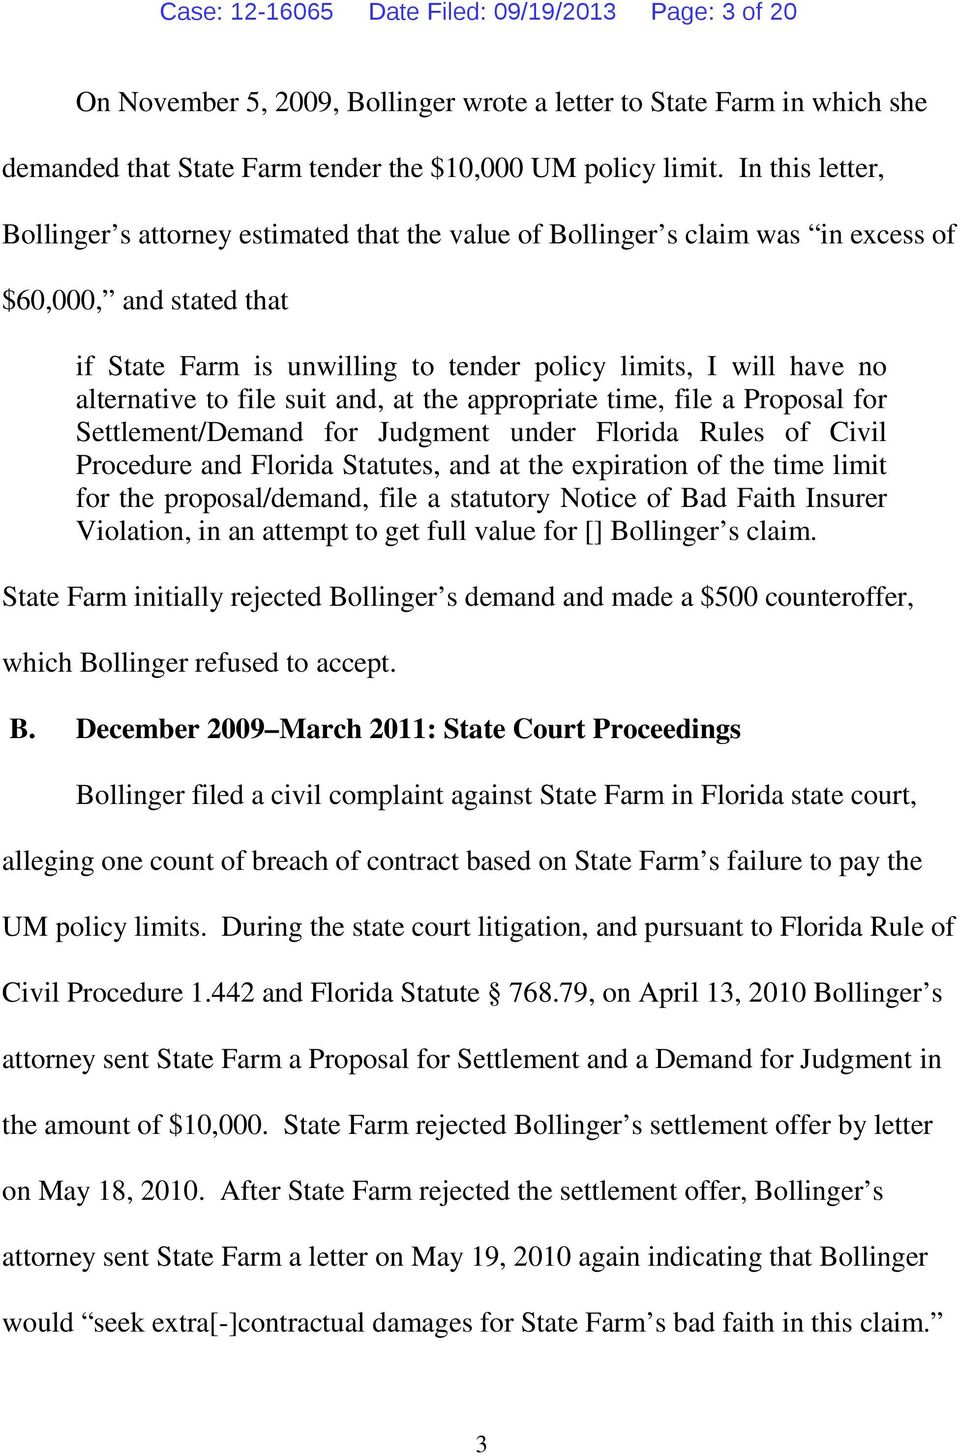 alternative to file suit and, at the appropriate time, file a Proposal for Settlement/Demand for Judgment under Florida Rules of Civil Procedure and Florida Statutes, and at the expiration of the